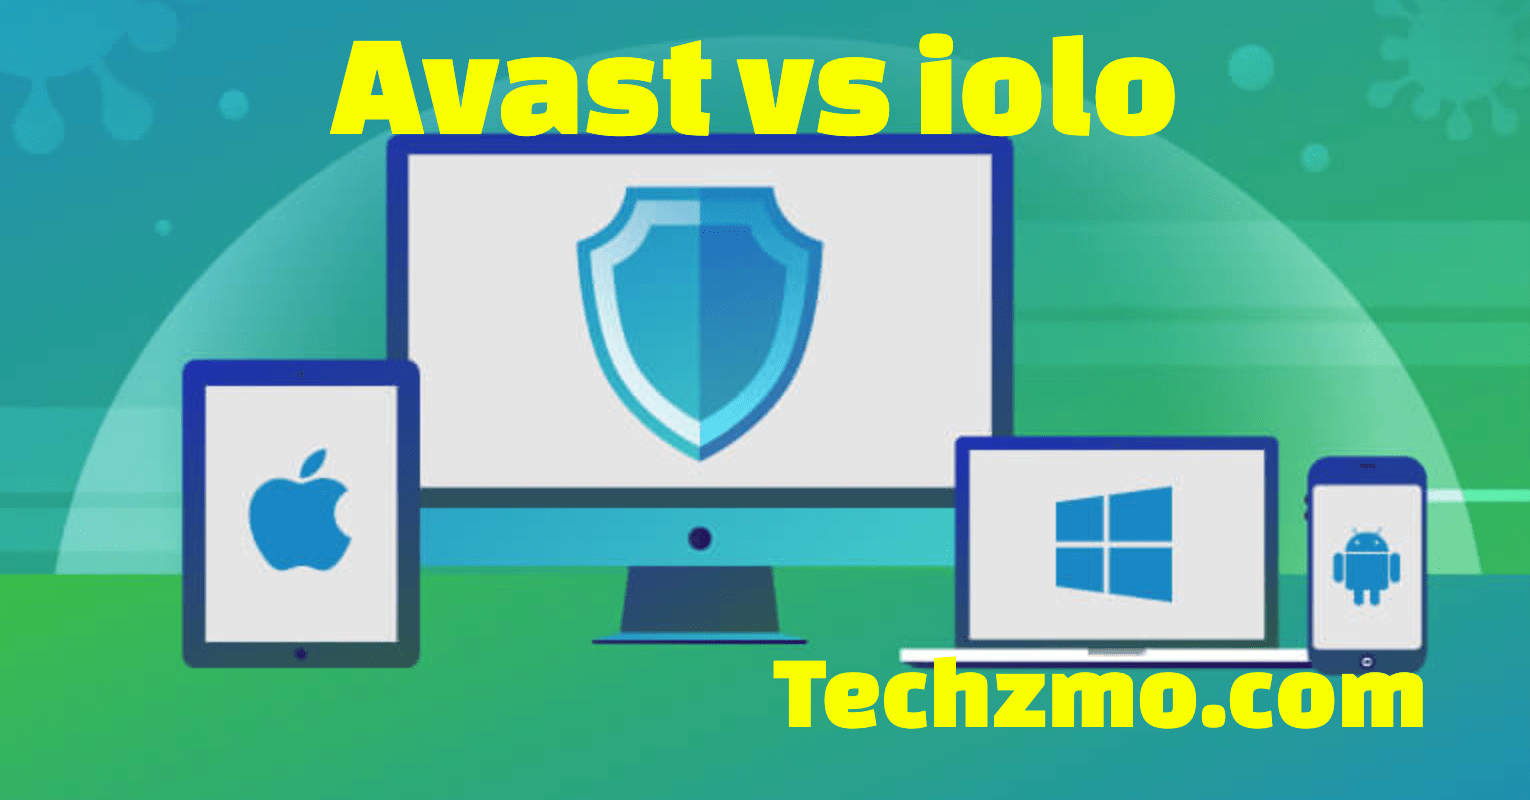 Avast vs iolo: which is better